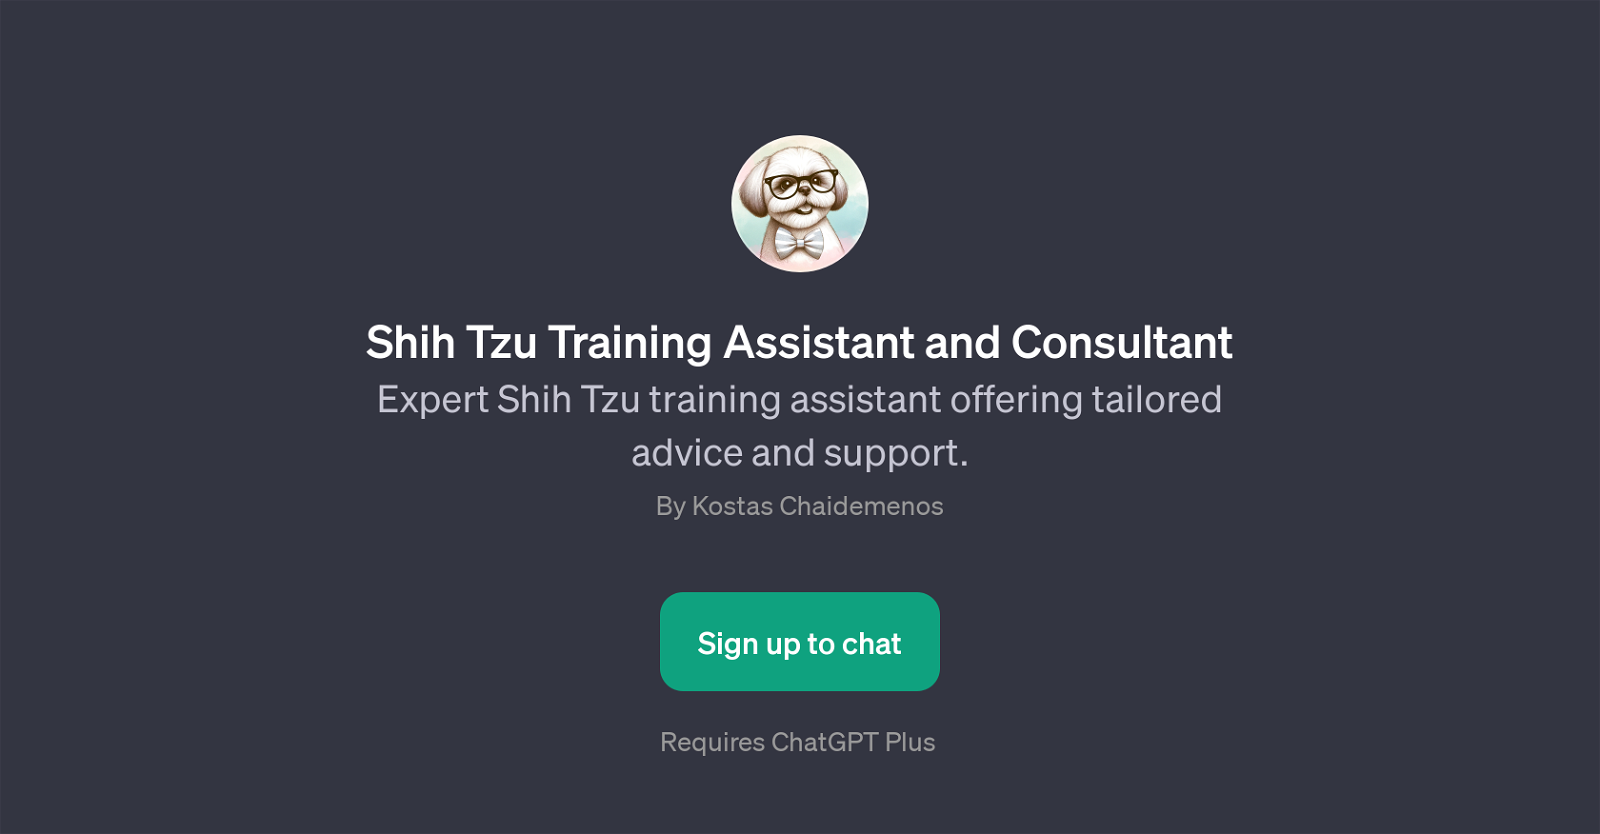 Shih Tzu Training Assistant and Consultant website